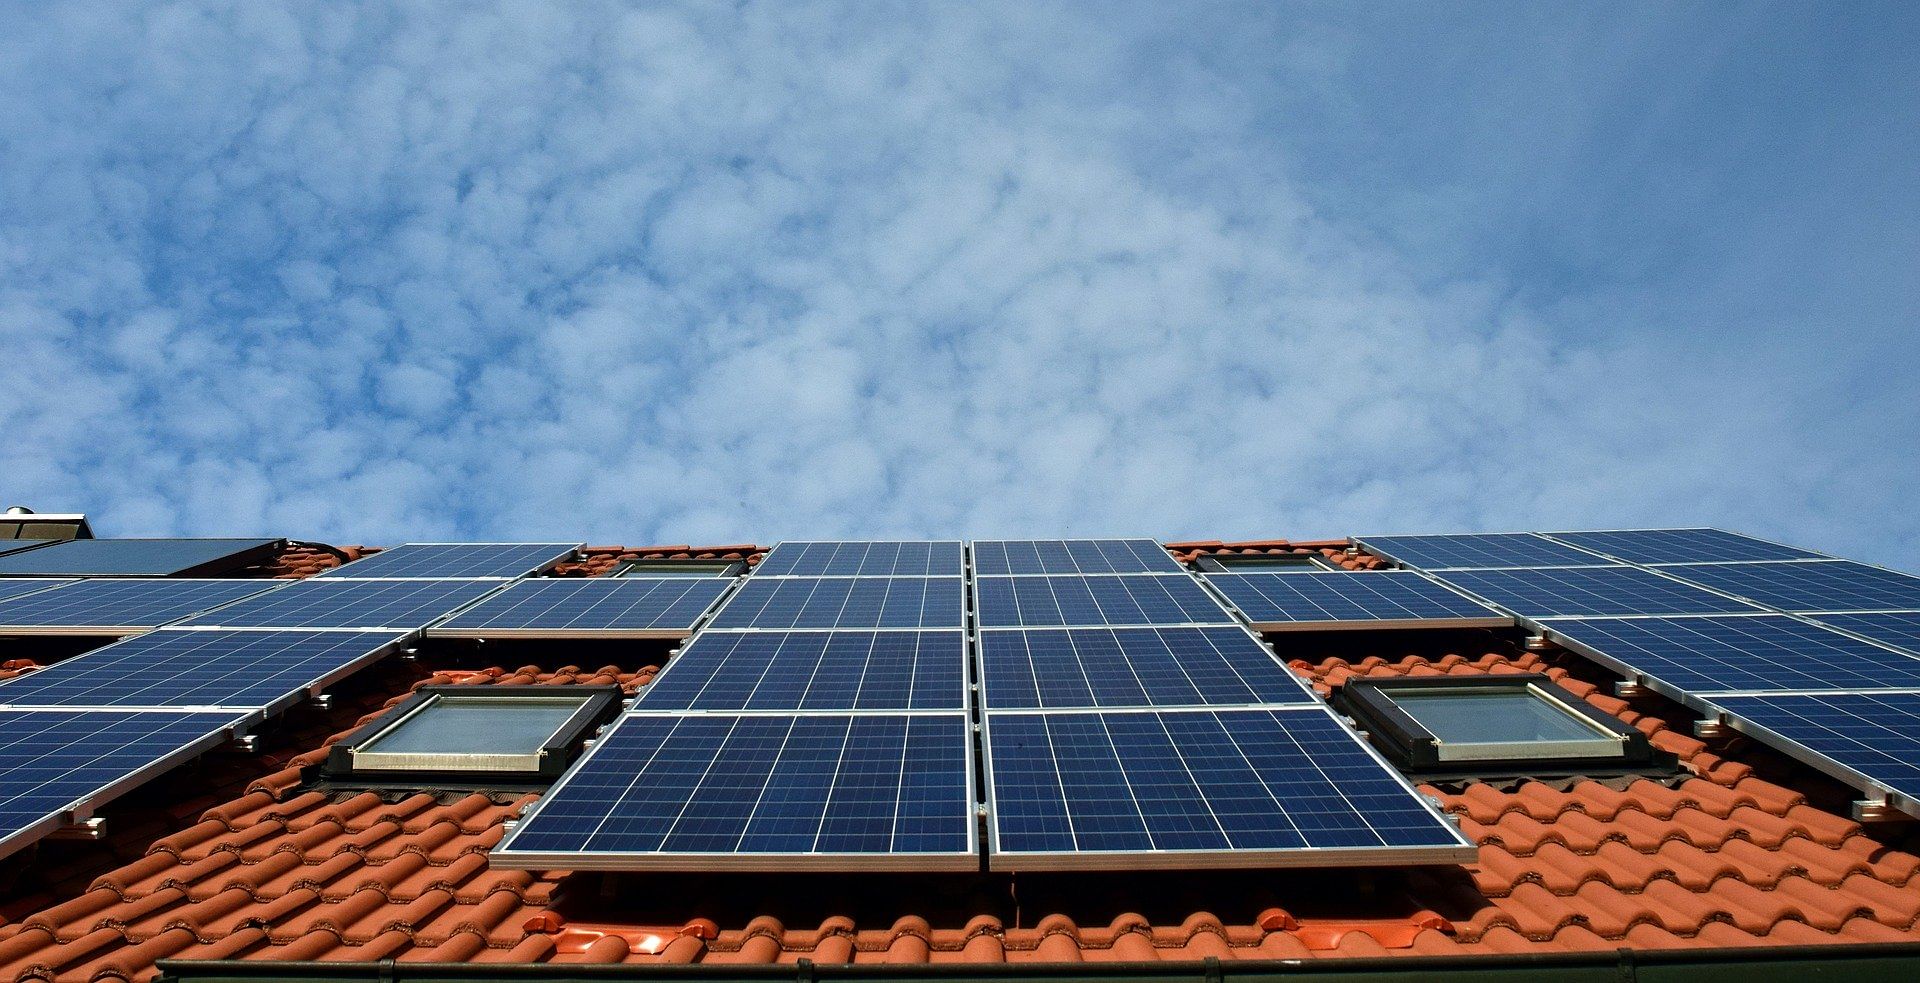 Icra further noted that the Indian solar sector has been import dependent with respect to procurement of cells, modules and other equipment given the cost competitiveness of imports as compared to domestically manufactured products. Representative image/Credit: Pixabay Image